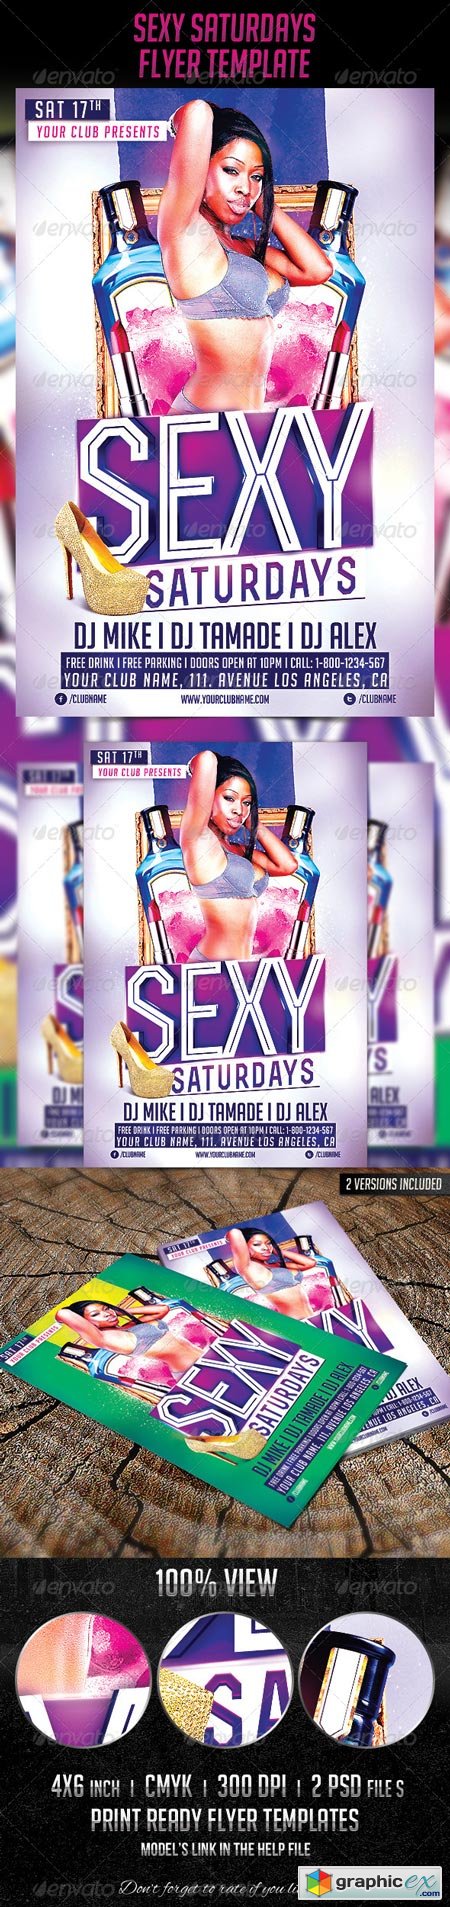 Sexy Saturdays Party Flyer Template 6533815